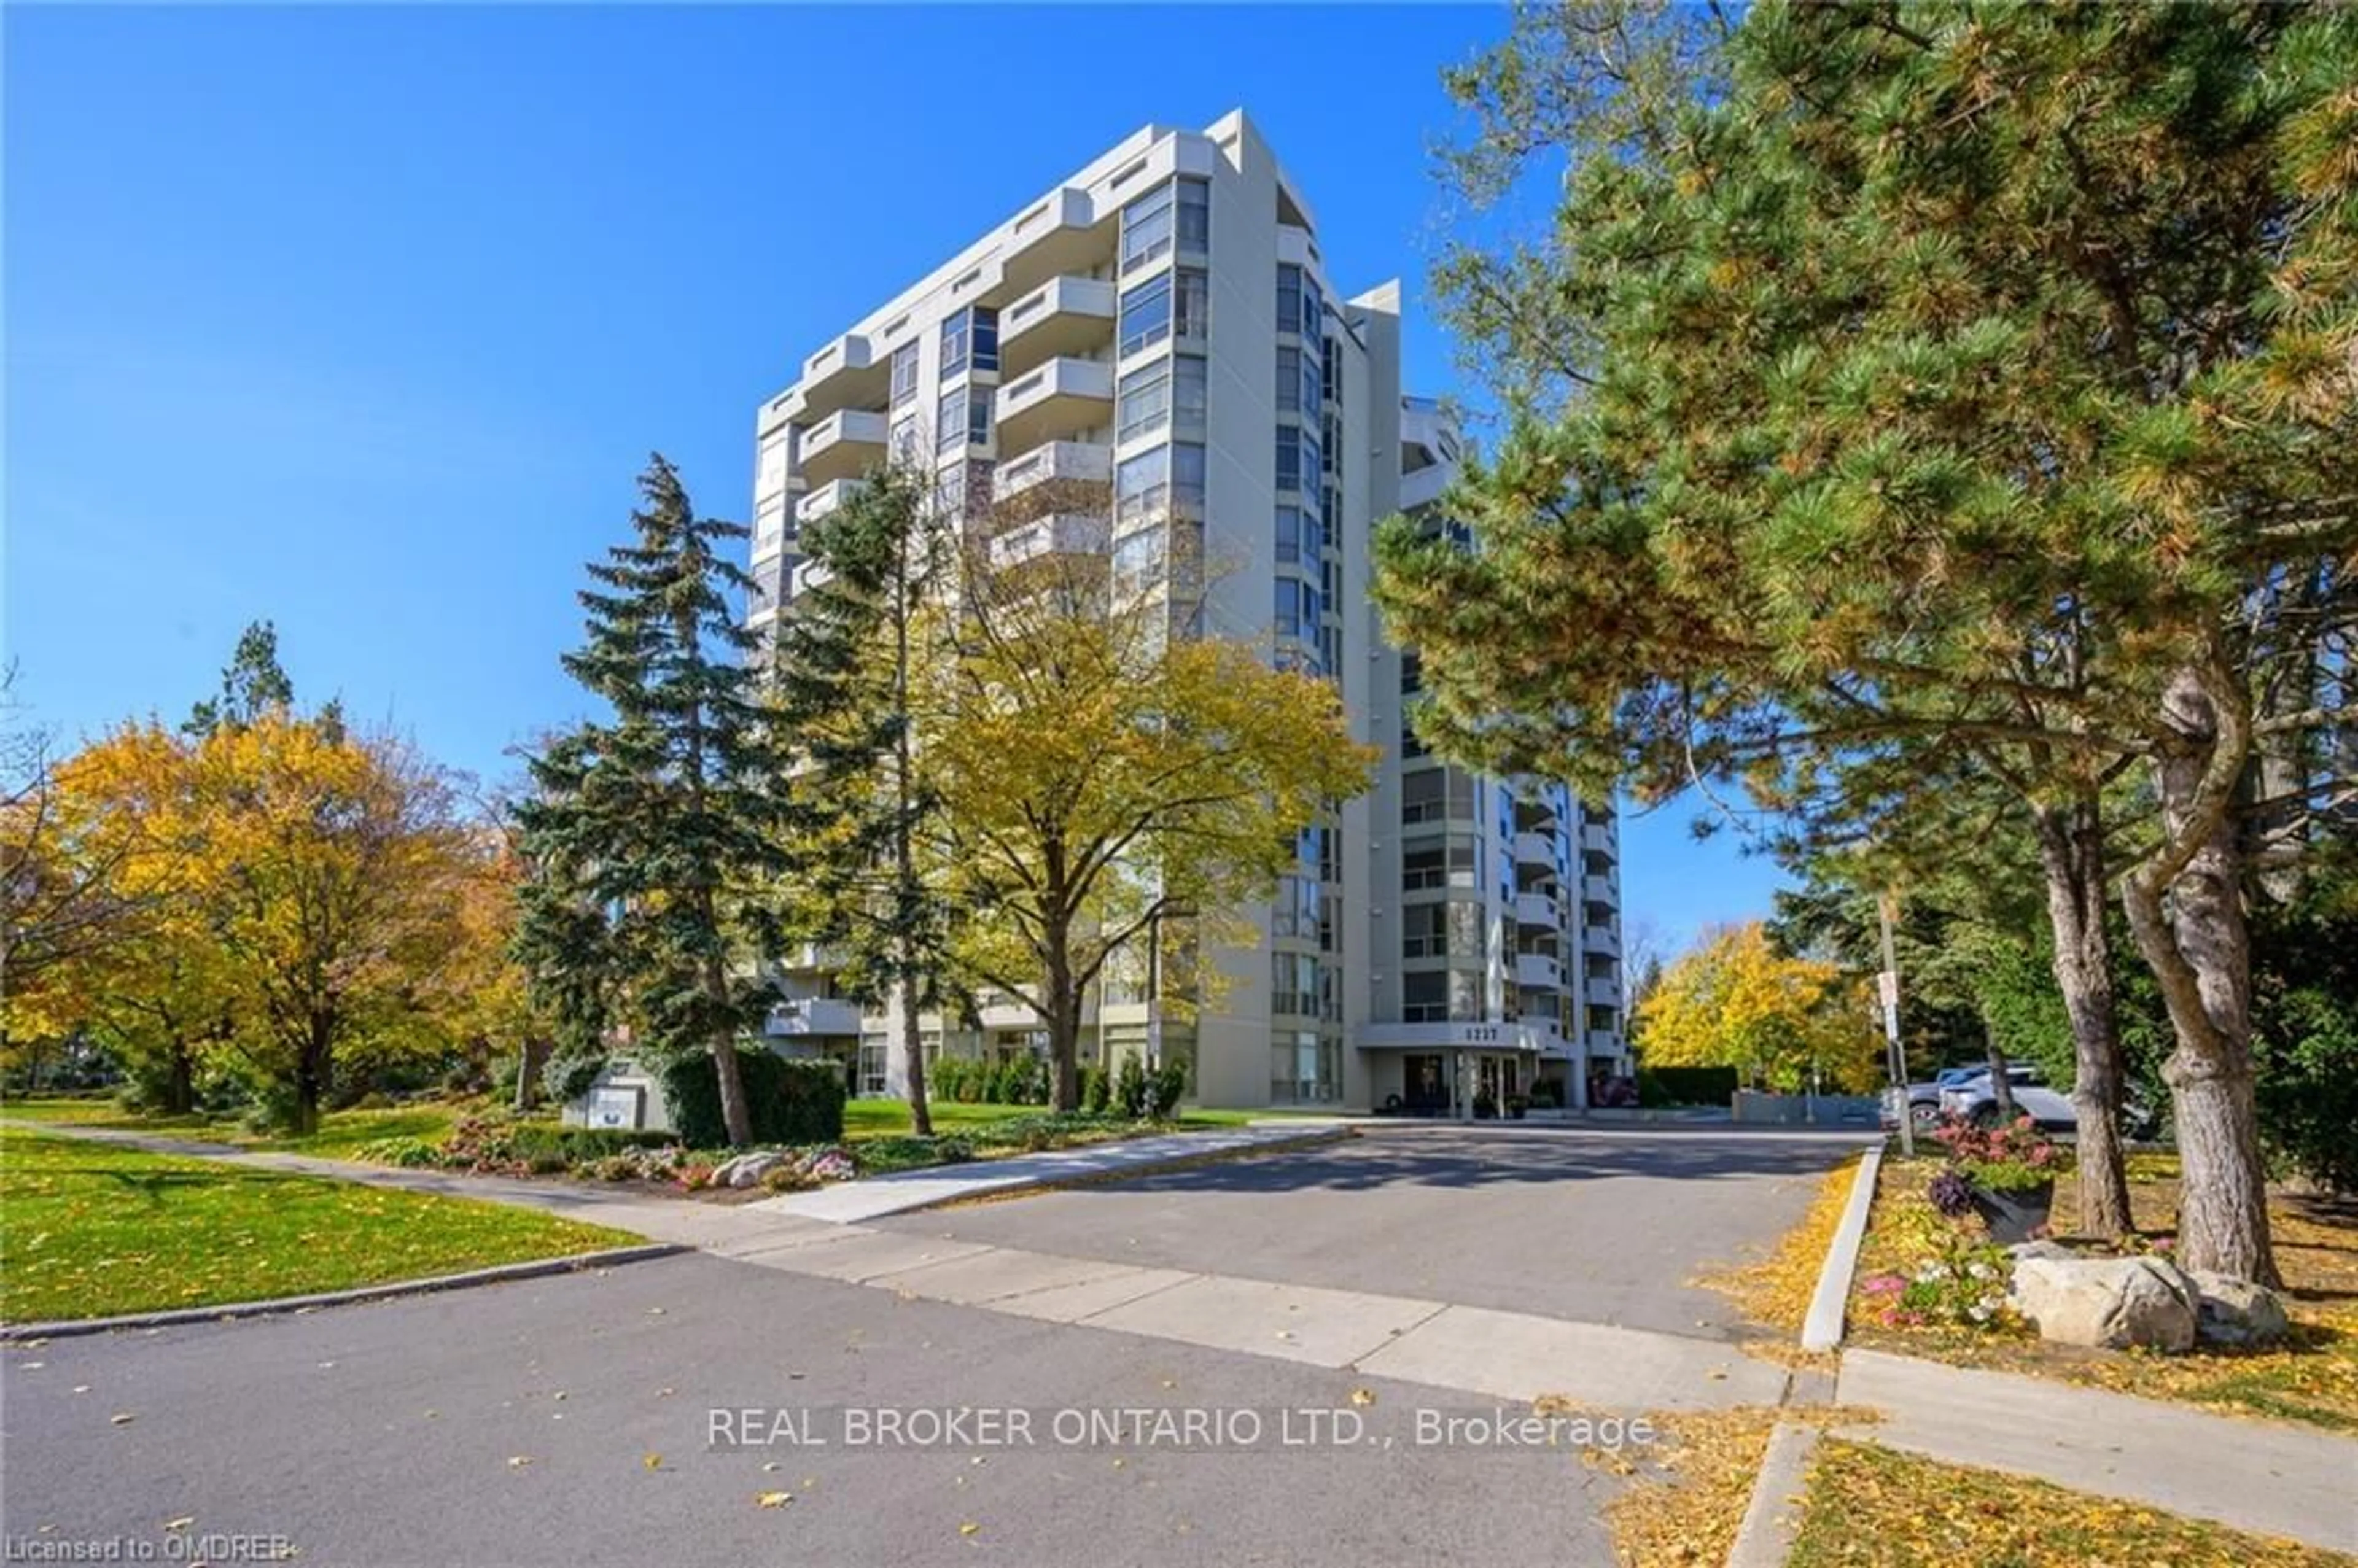 A pic from exterior of the house or condo for 1237 North Shore Blvd #301, Burlington Ontario L7S 2H8